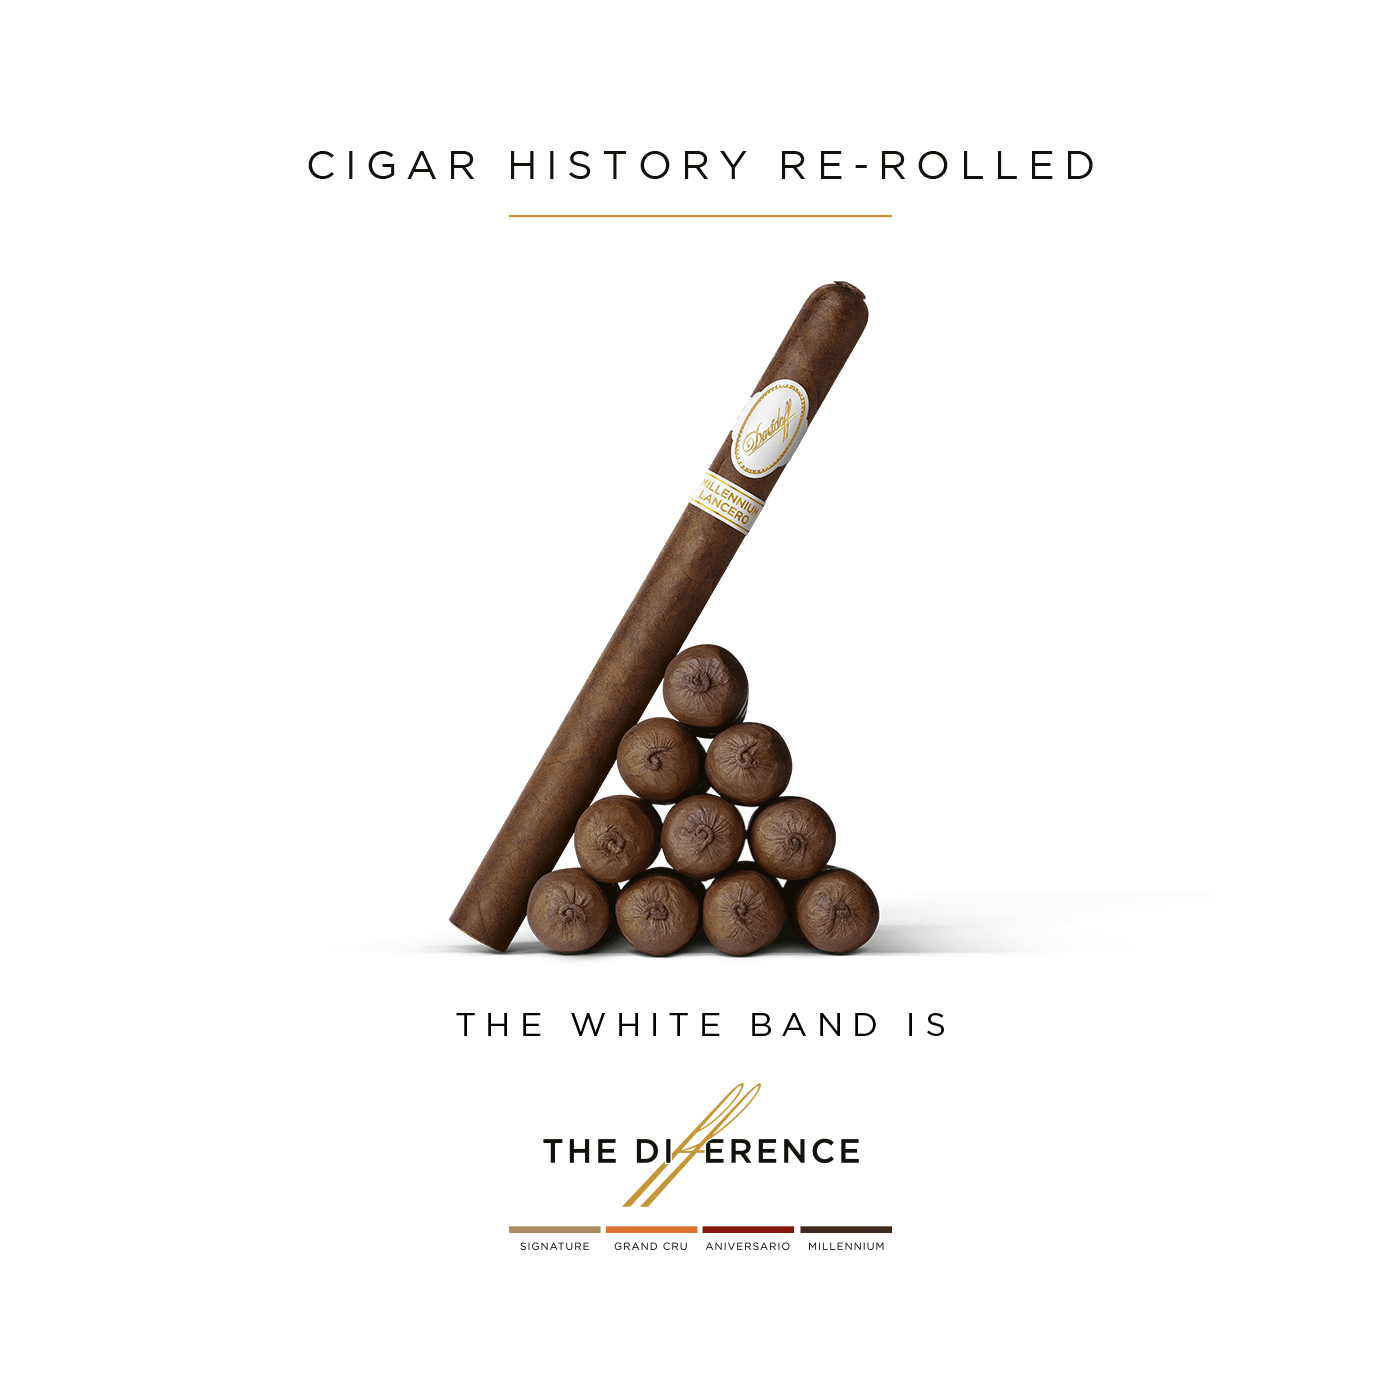 Ten Davidoff Millennium Lancero cigars in a triangle-shaped pile with the eleventh cigar leaning against it.